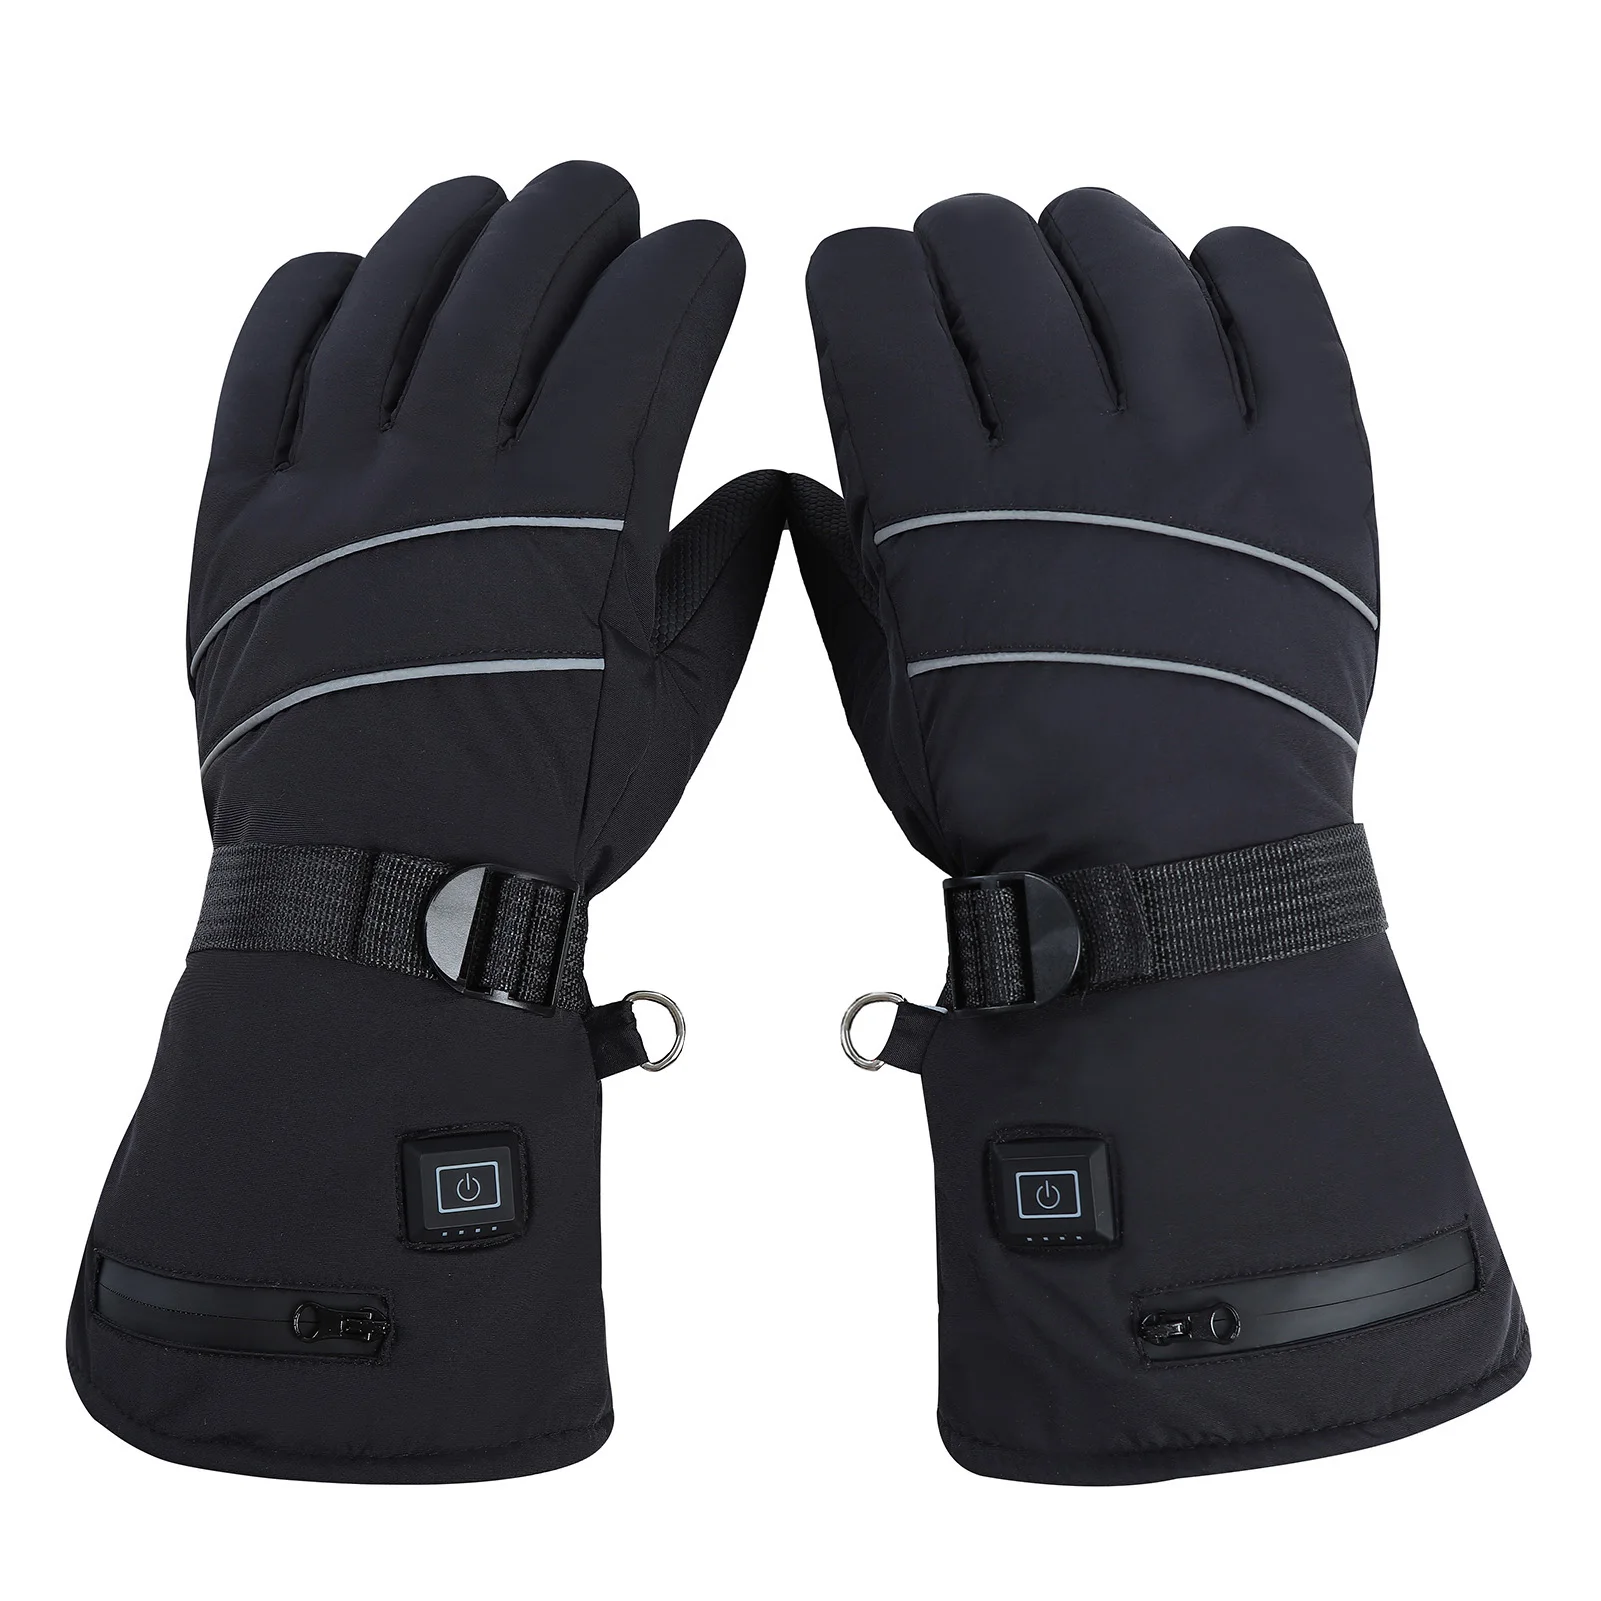 

8.4V USB Rechargeable Battery Warm Self Heating Ski Gloves Winter Snowmobile Riding Electric Heated Gloves Hand Warmer Mittens